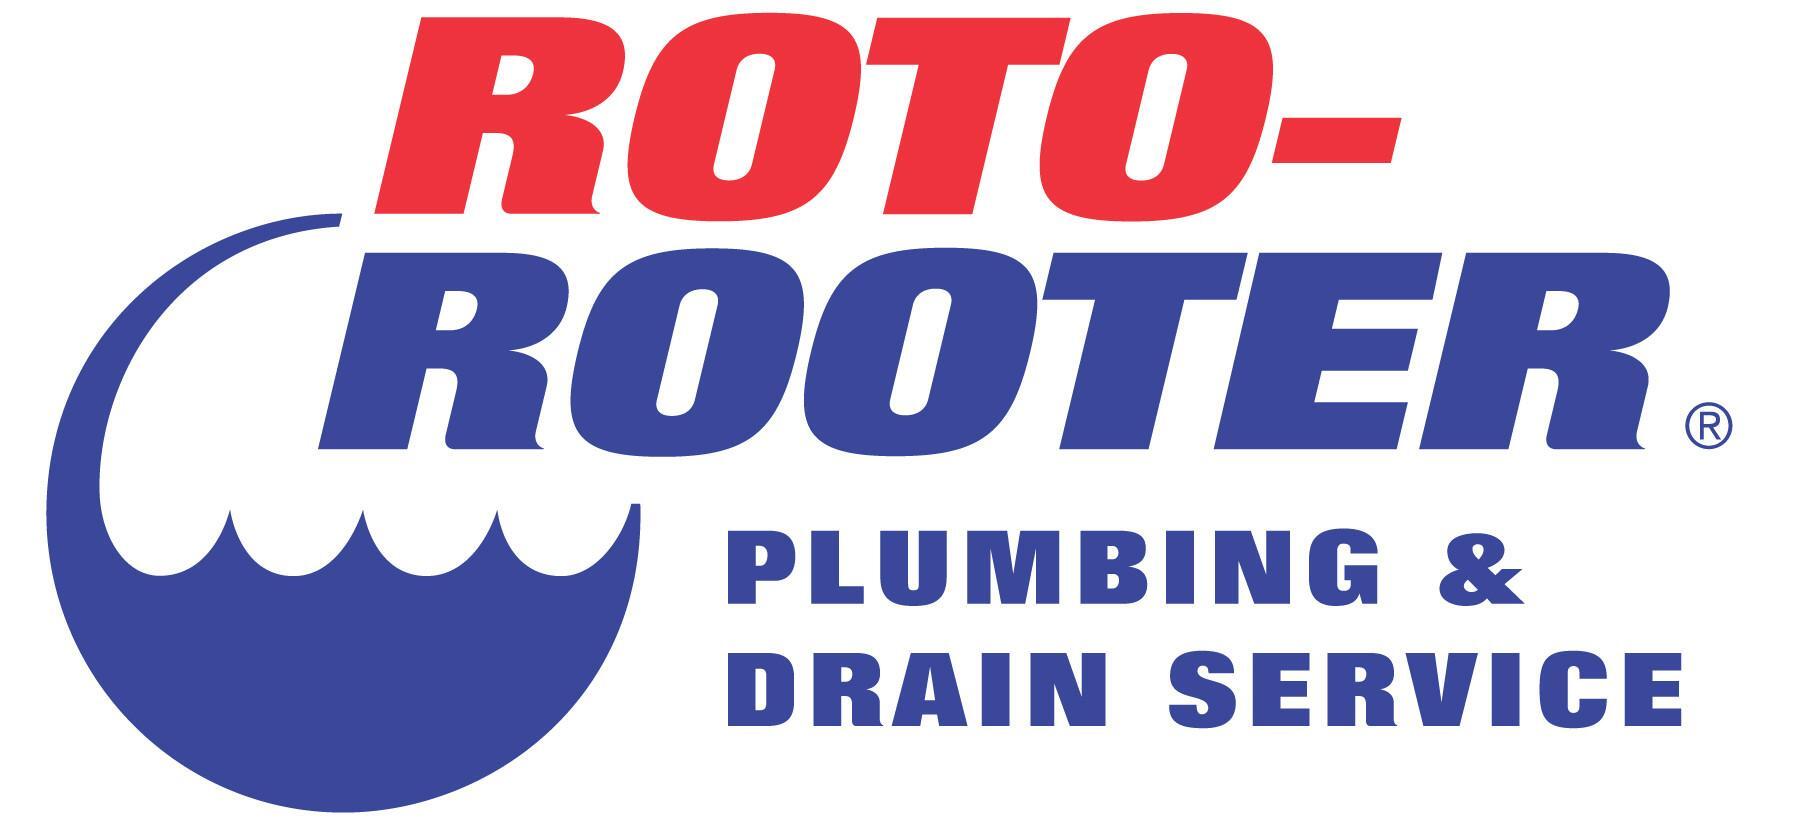 How To Use A Drain Snake For Plumbing - Western Rooter & Plumbing